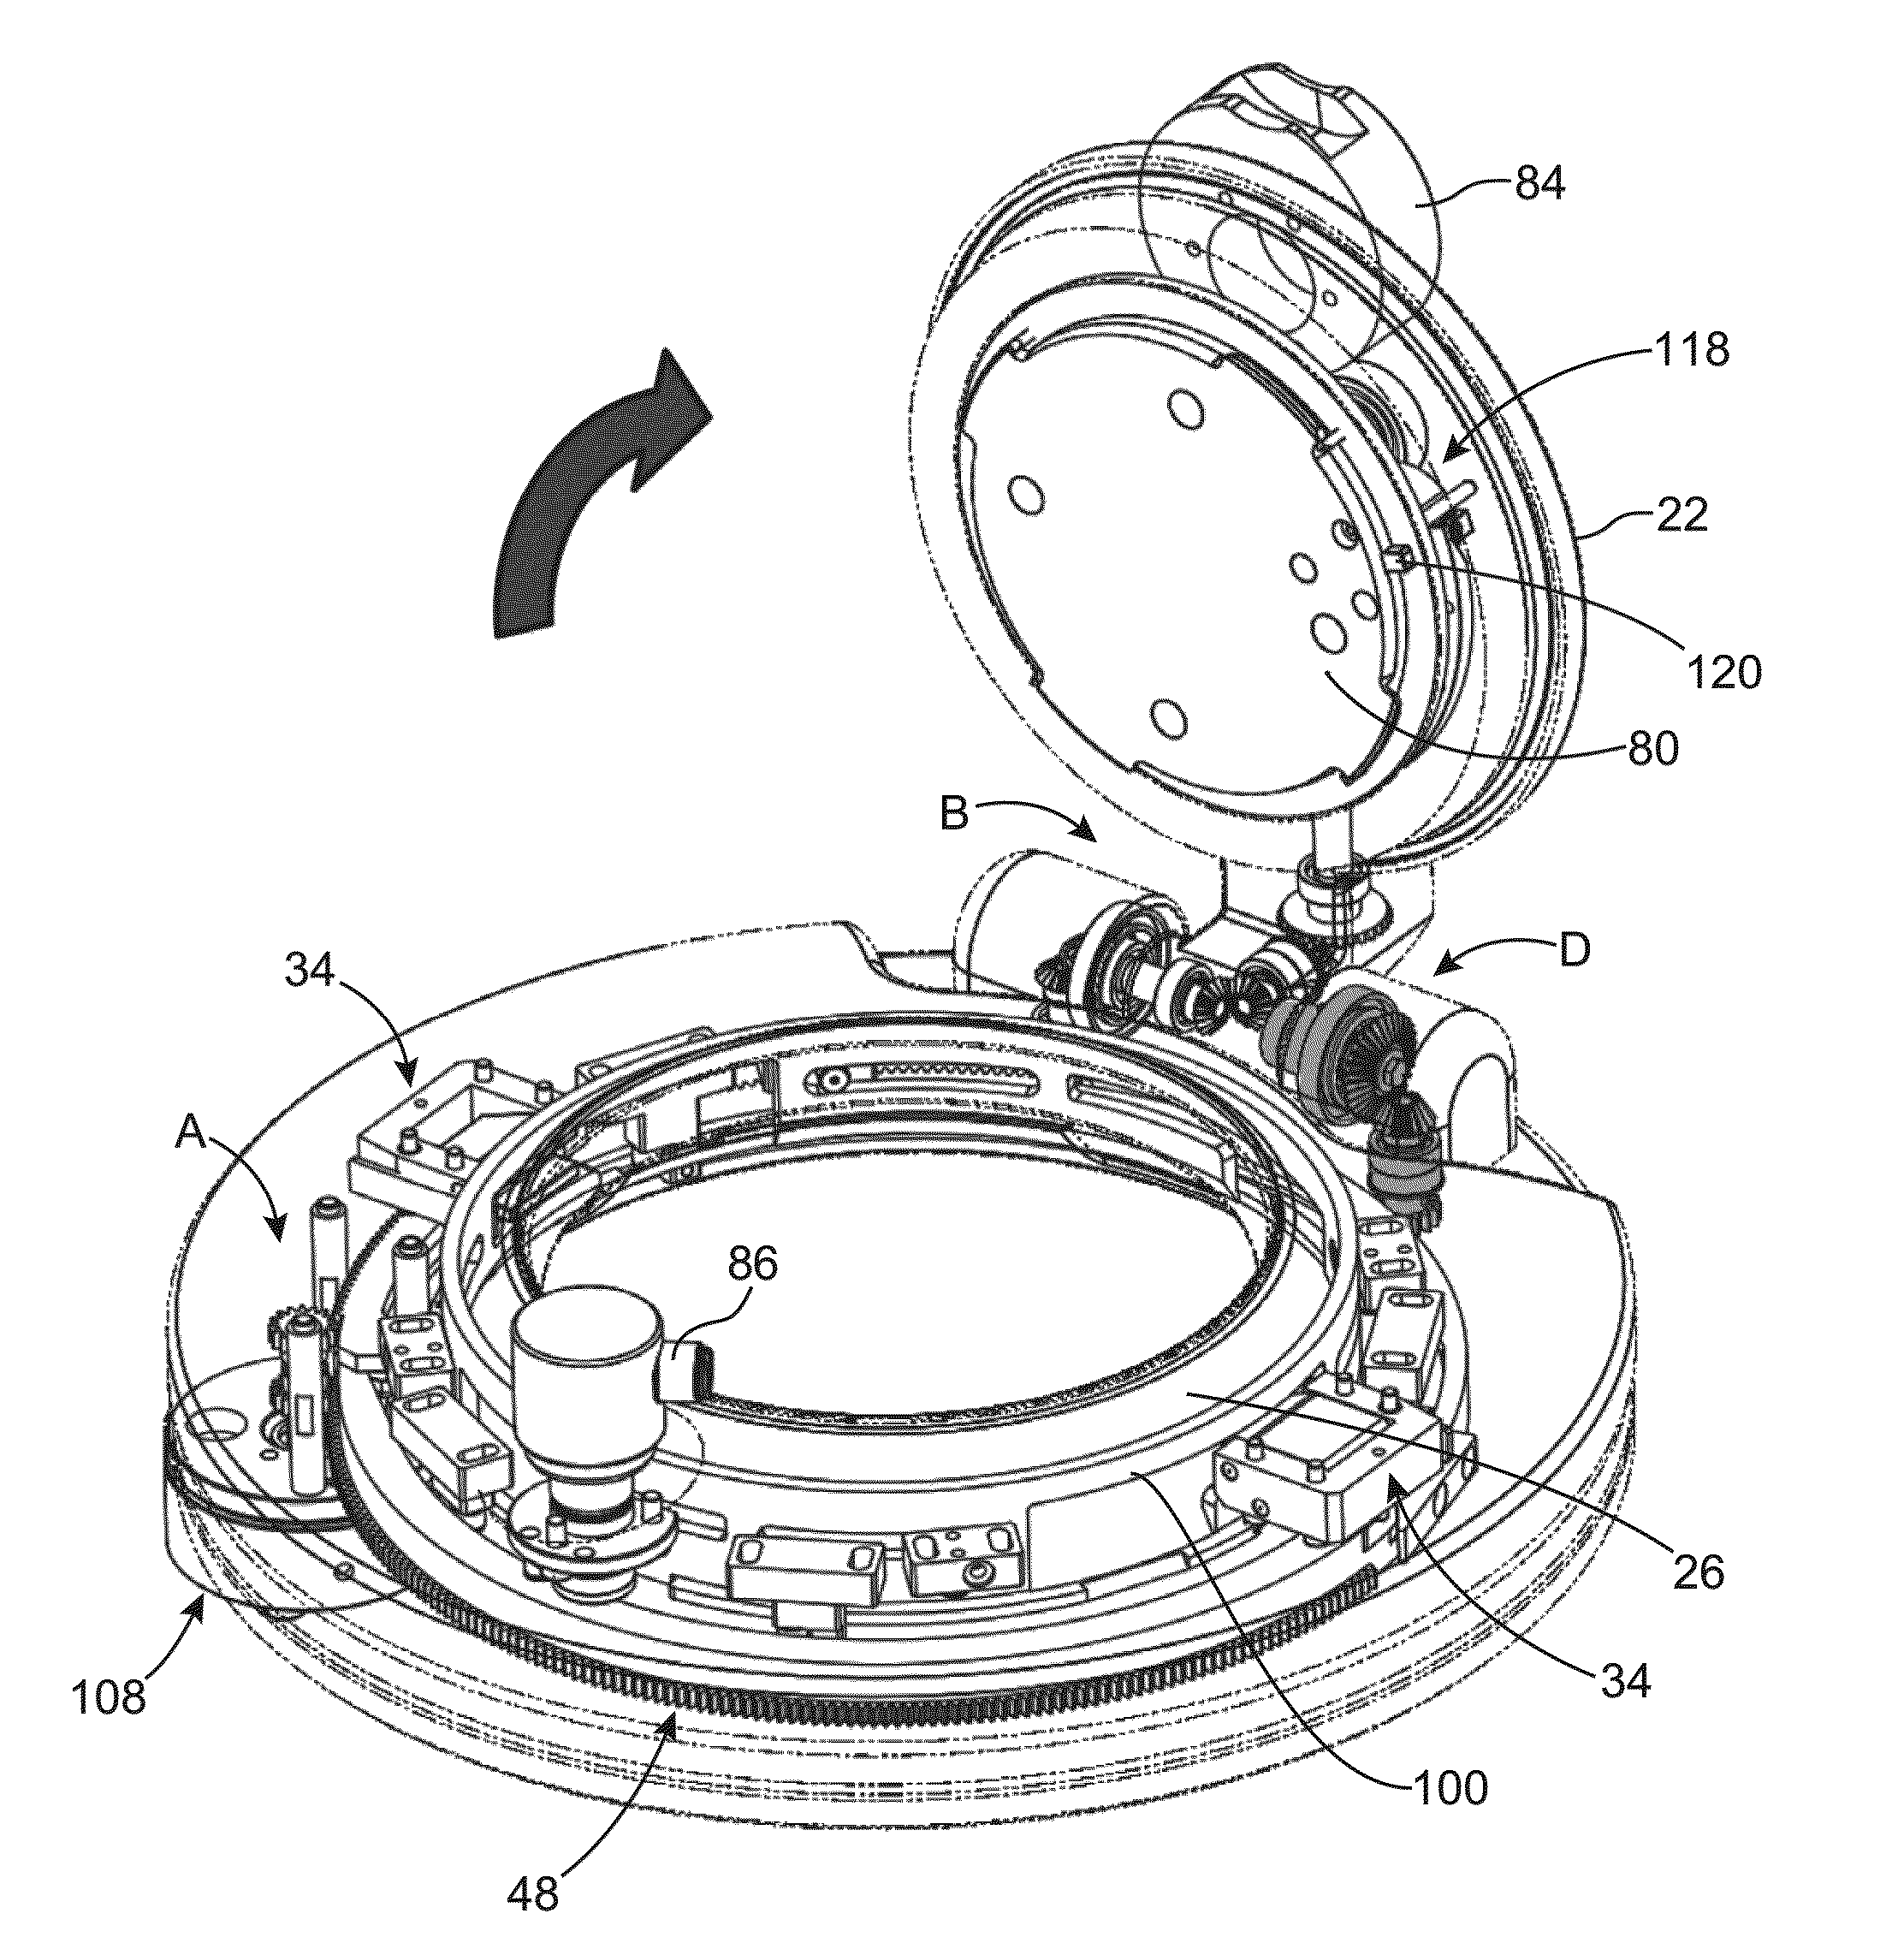 Device providing fluidtight connection with improved operational safety